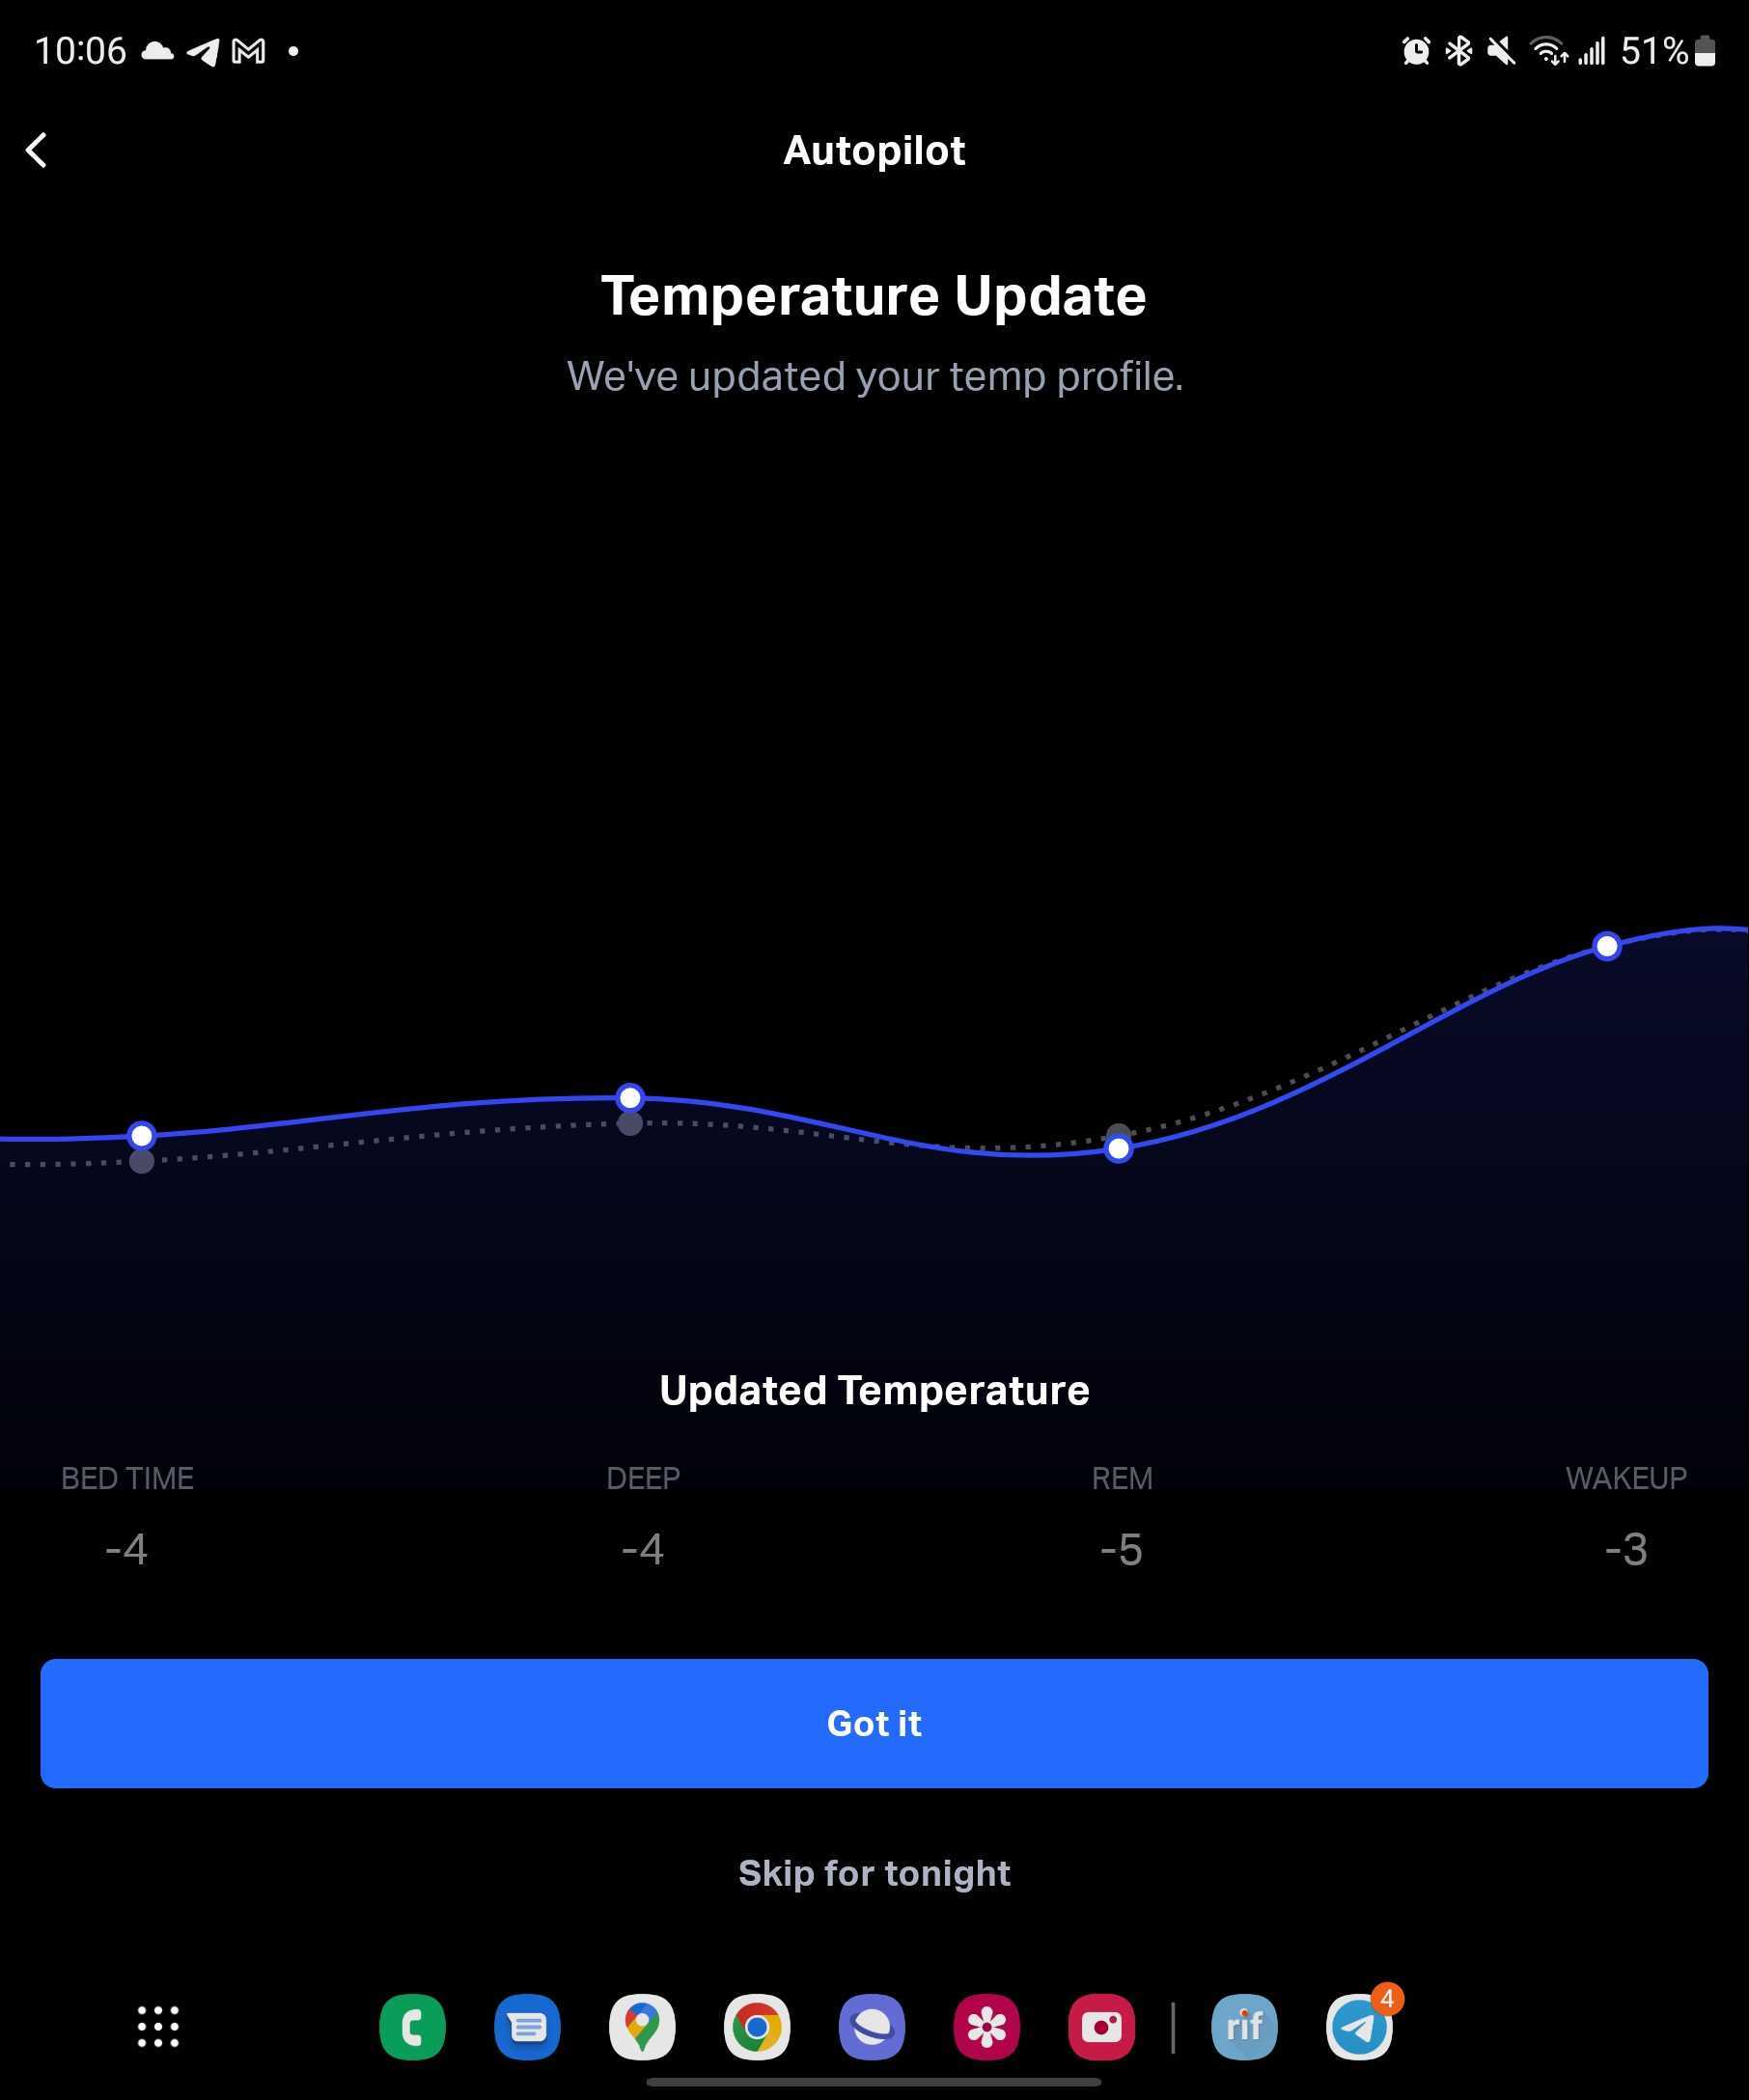 In the Eight Sleep app, you can set your beds temperature to various degrees of hot or cold, while the optional Autopilot features (which requires a $19 monthly subscription) can adjust temperatures automatically. " data-uuid="5fd044e6-ab06-366d-9c36-675ace0534be